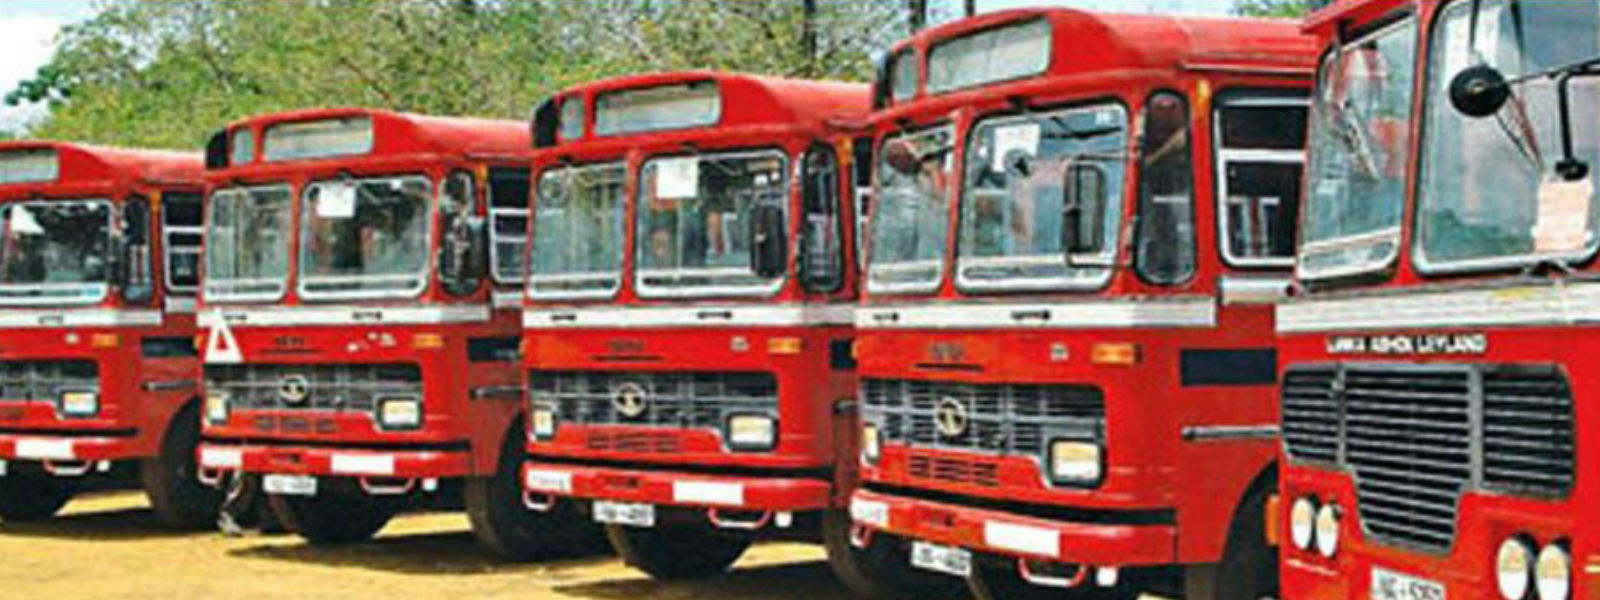 Additional SLTB buses in operation due to possible train strike